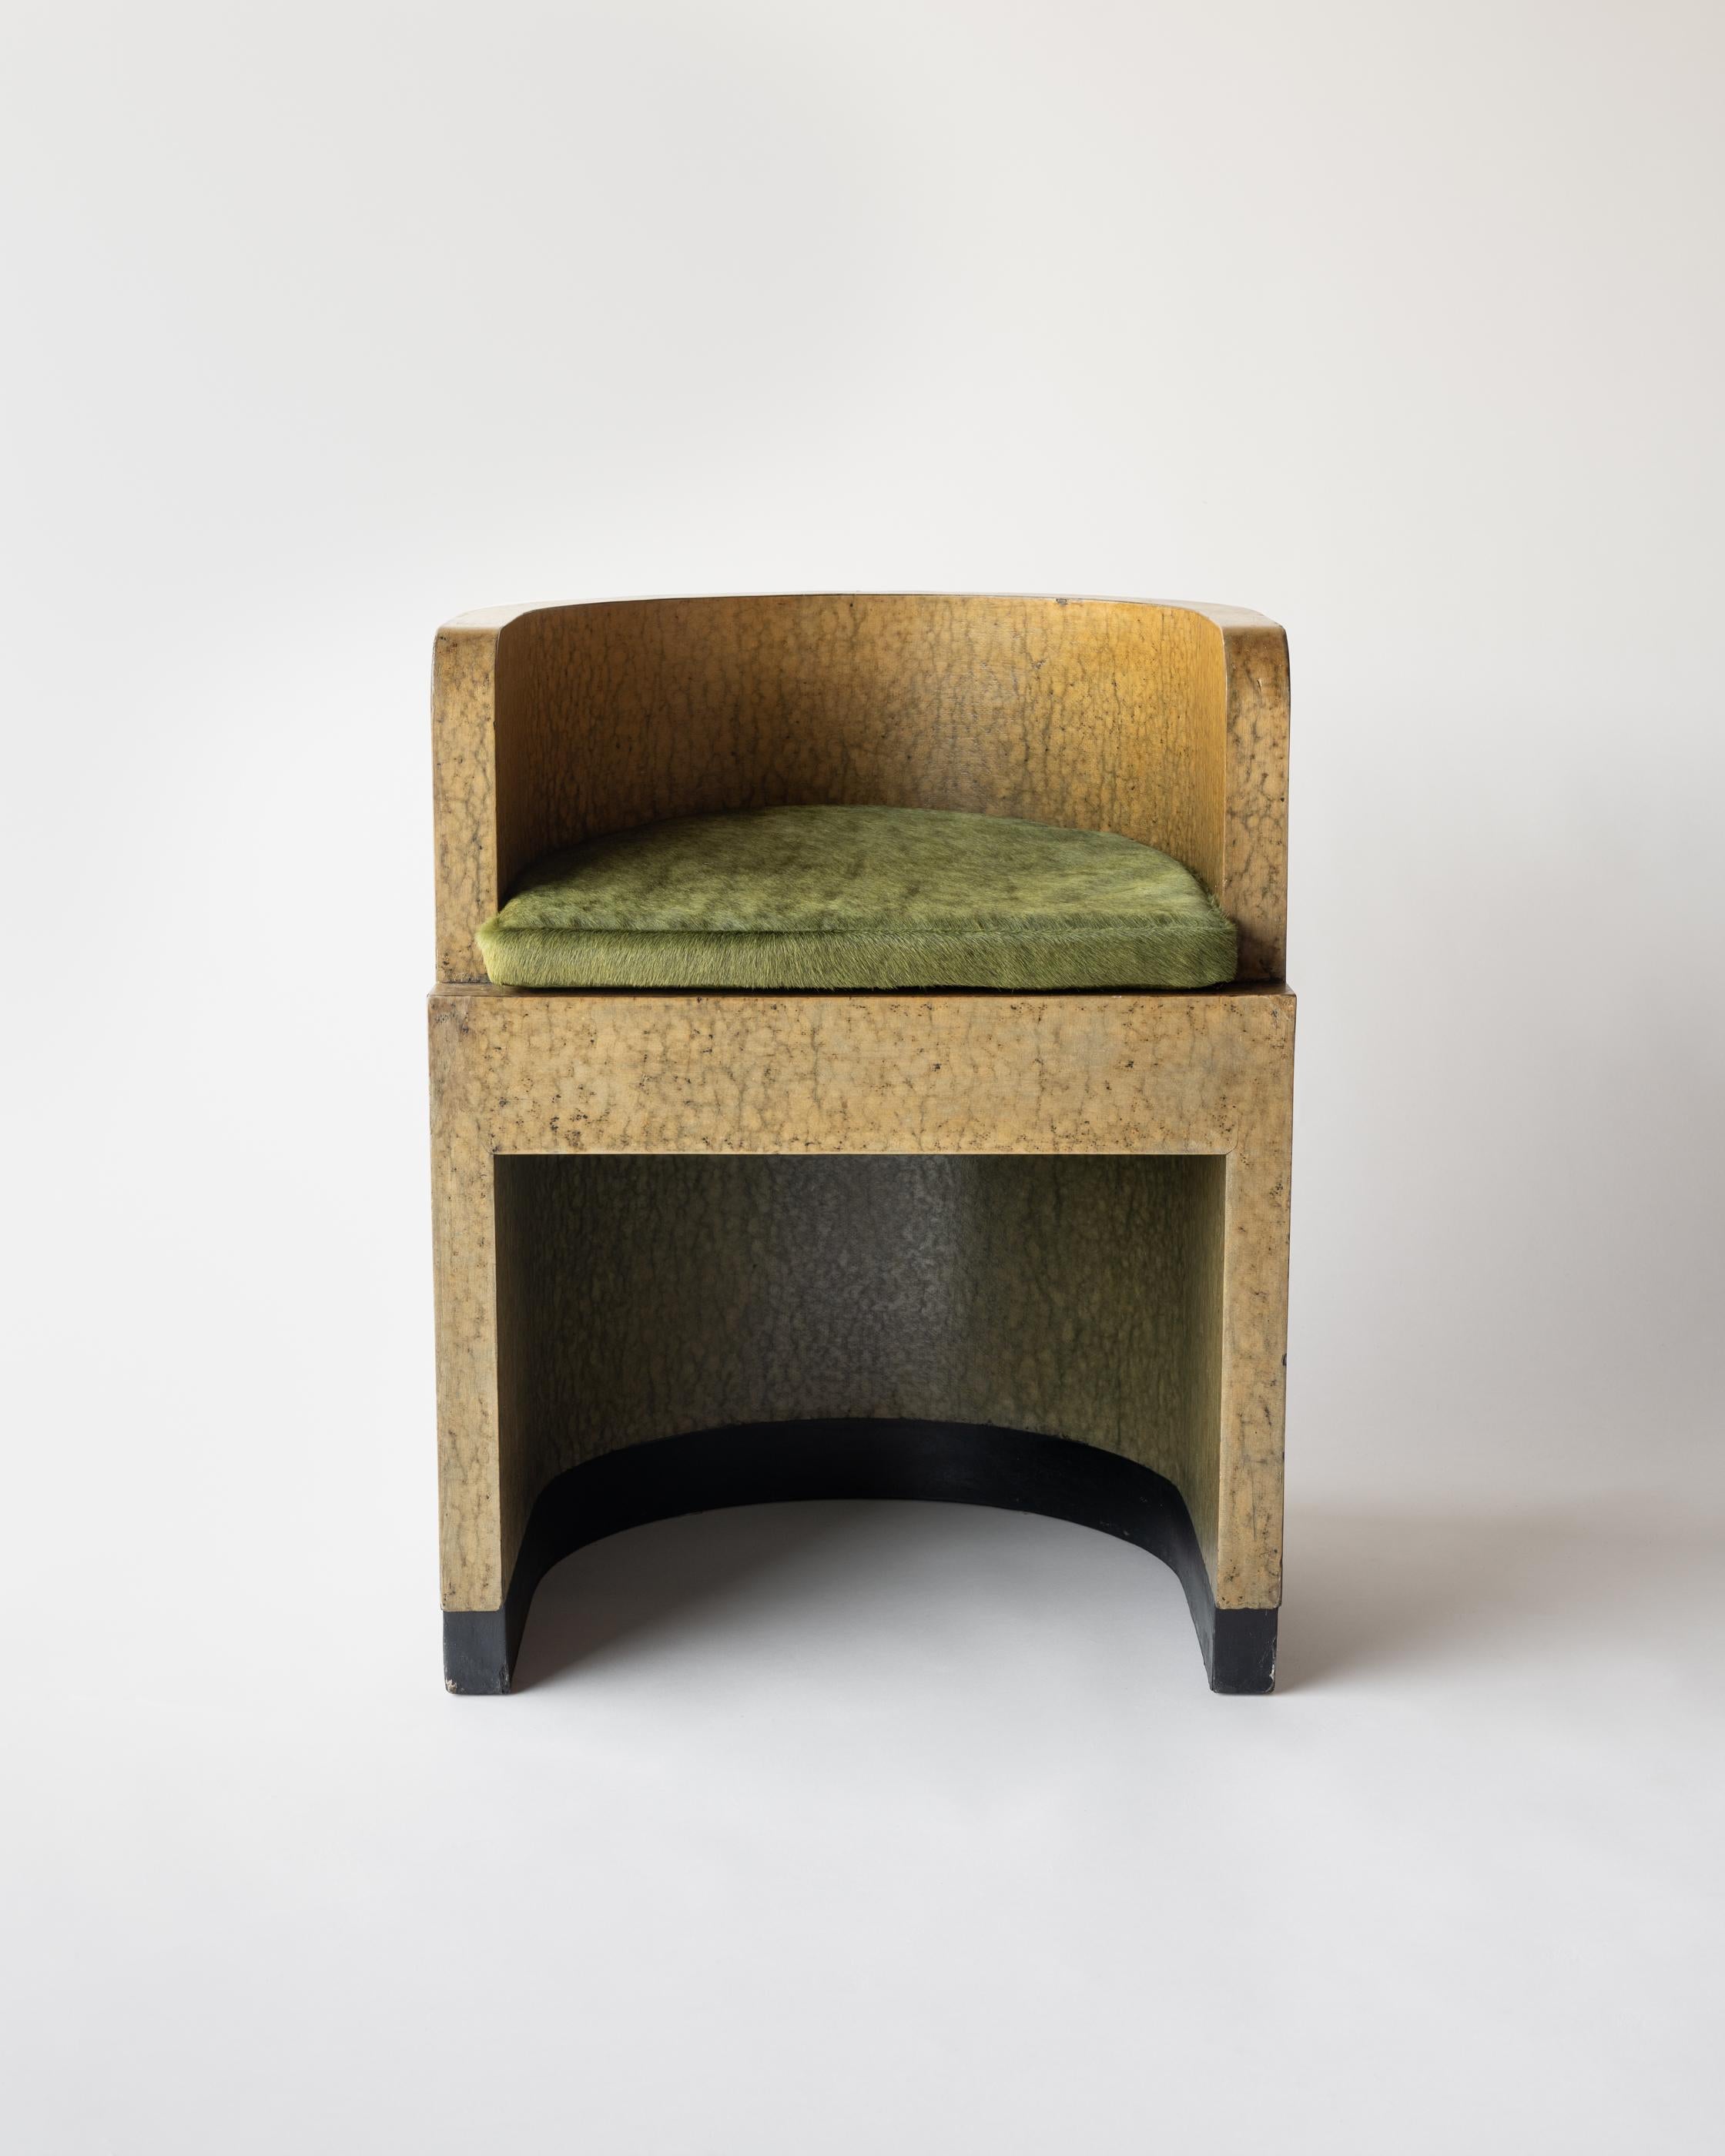 Gino Levi Montalcini & Giuseppe Pagano, Curved Back Armchair, c. 1928 In Good Condition For Sale In Los Angeles, CA